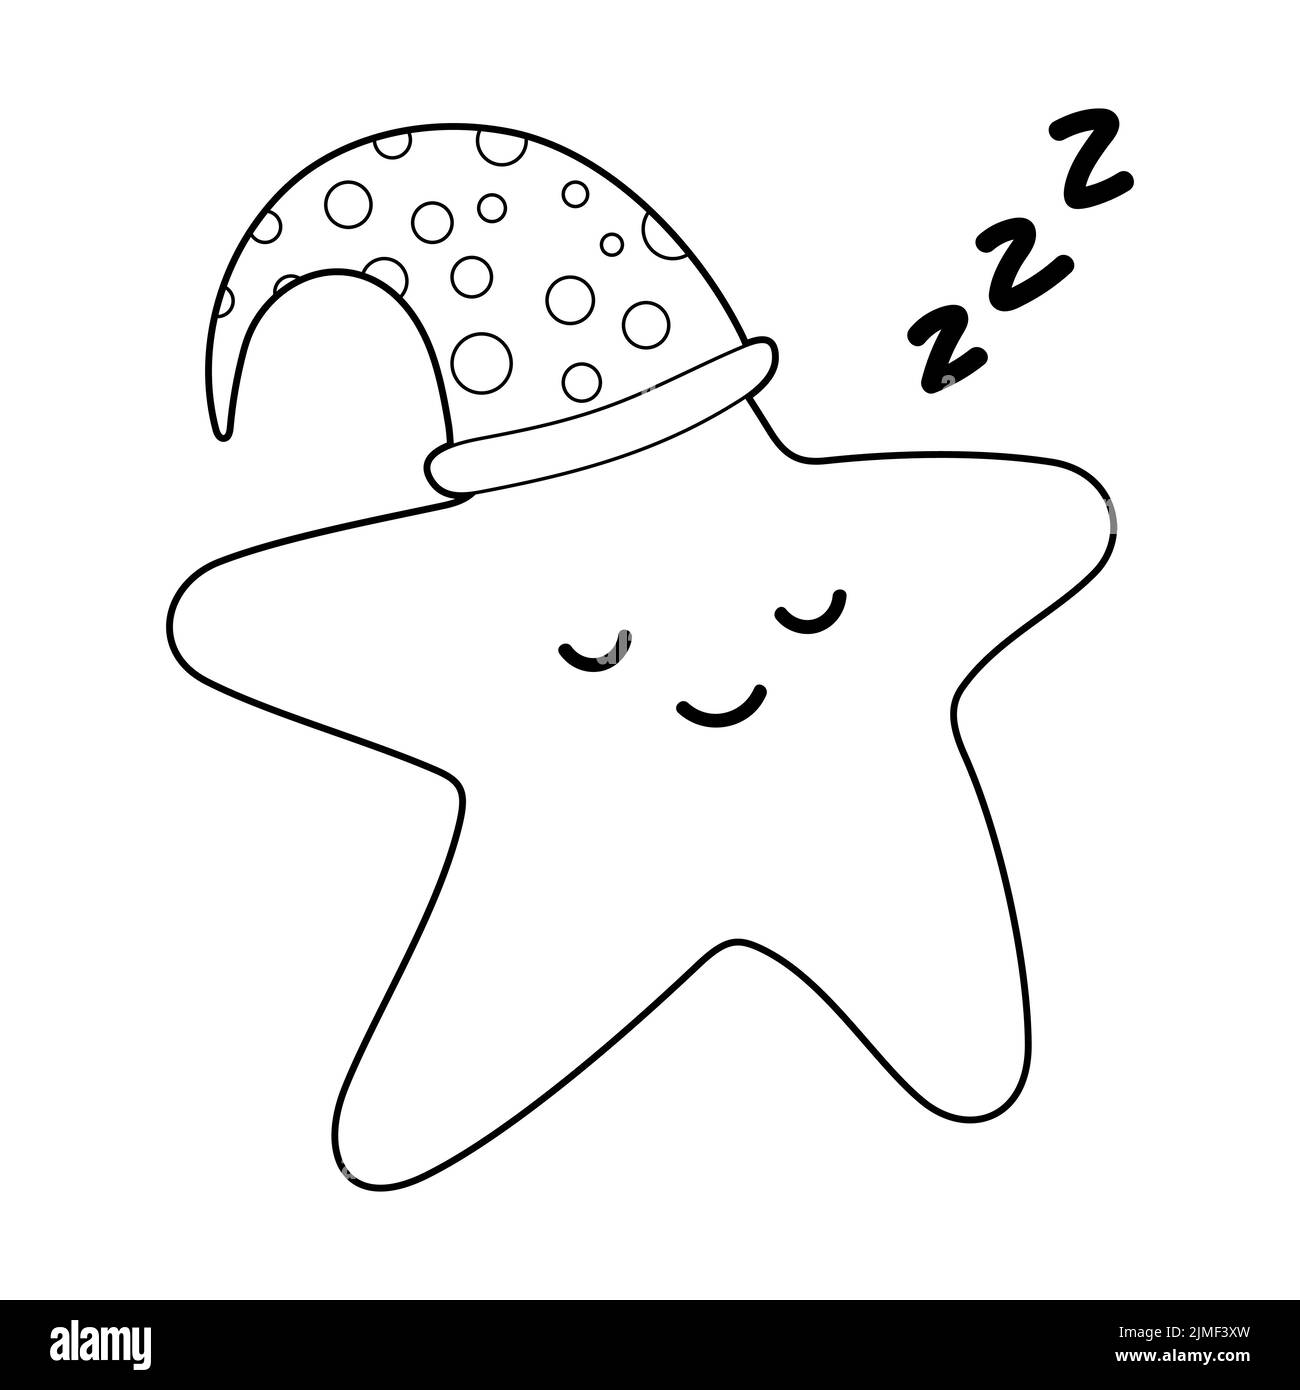 Coloring book for children. Draw a cute cartoon star sleeping in a sleep cap based. Vector Stock Vector